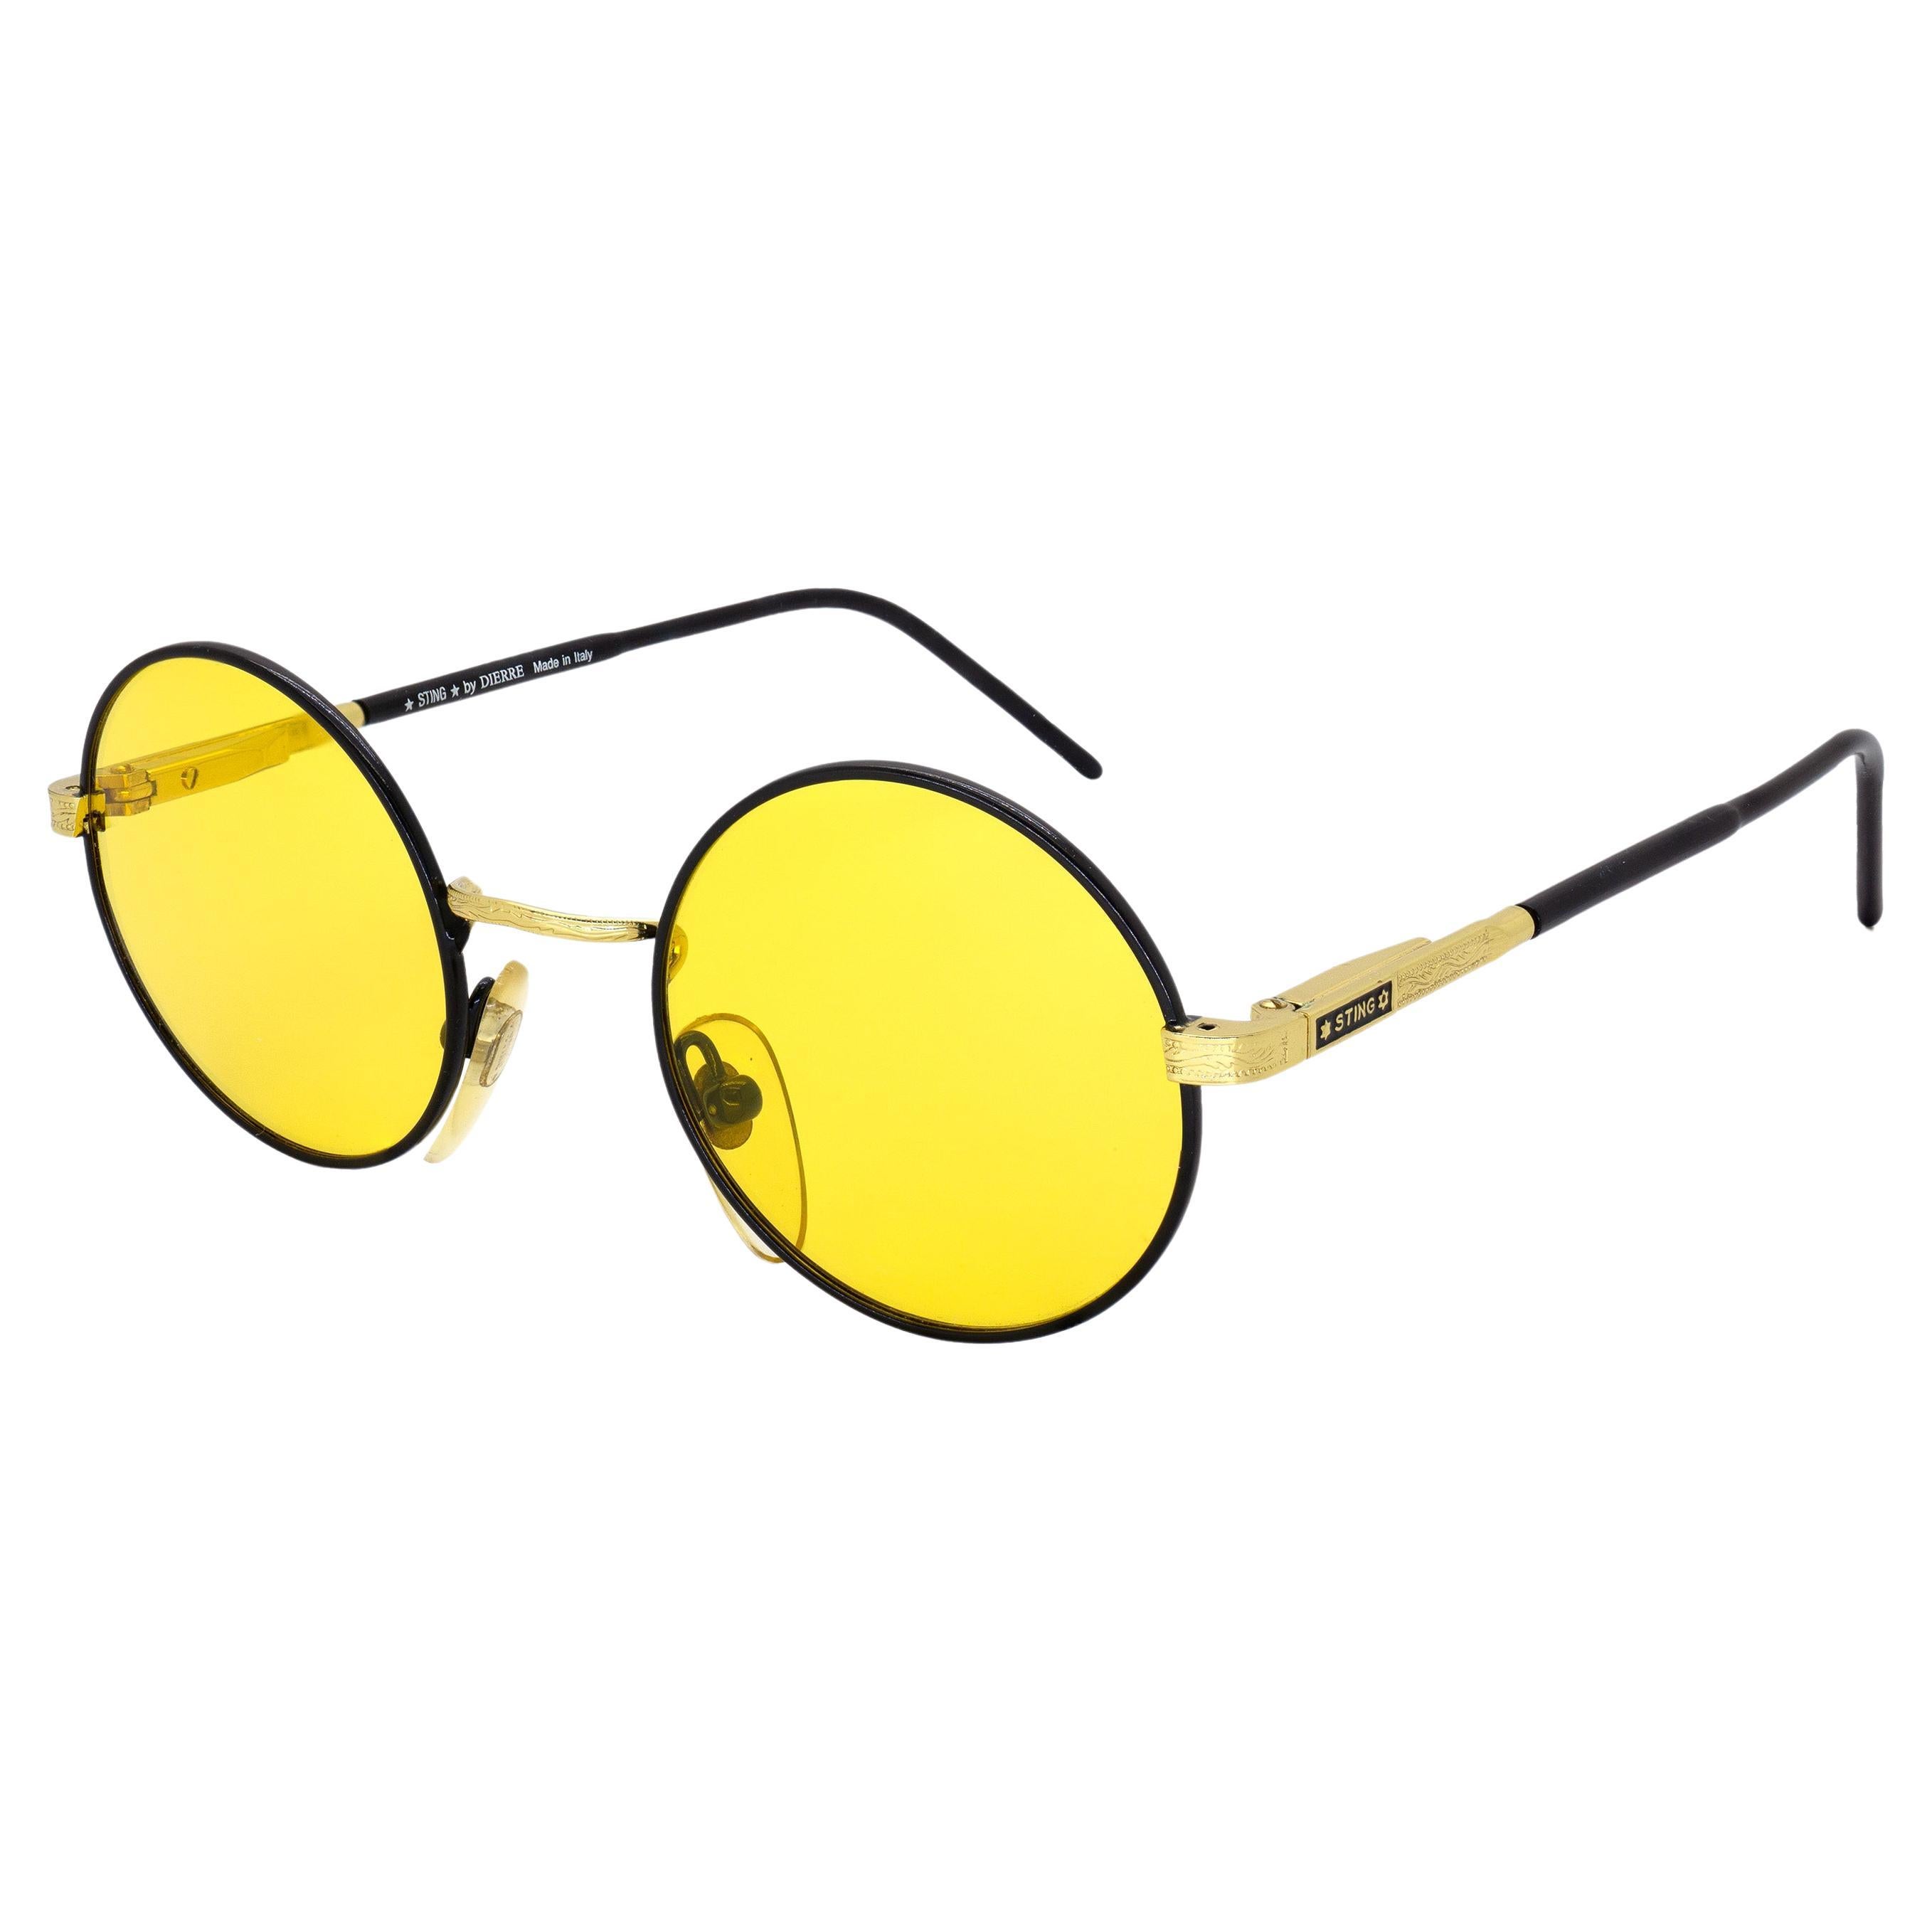 Sting round vintage sunglasses, Italy  For Sale